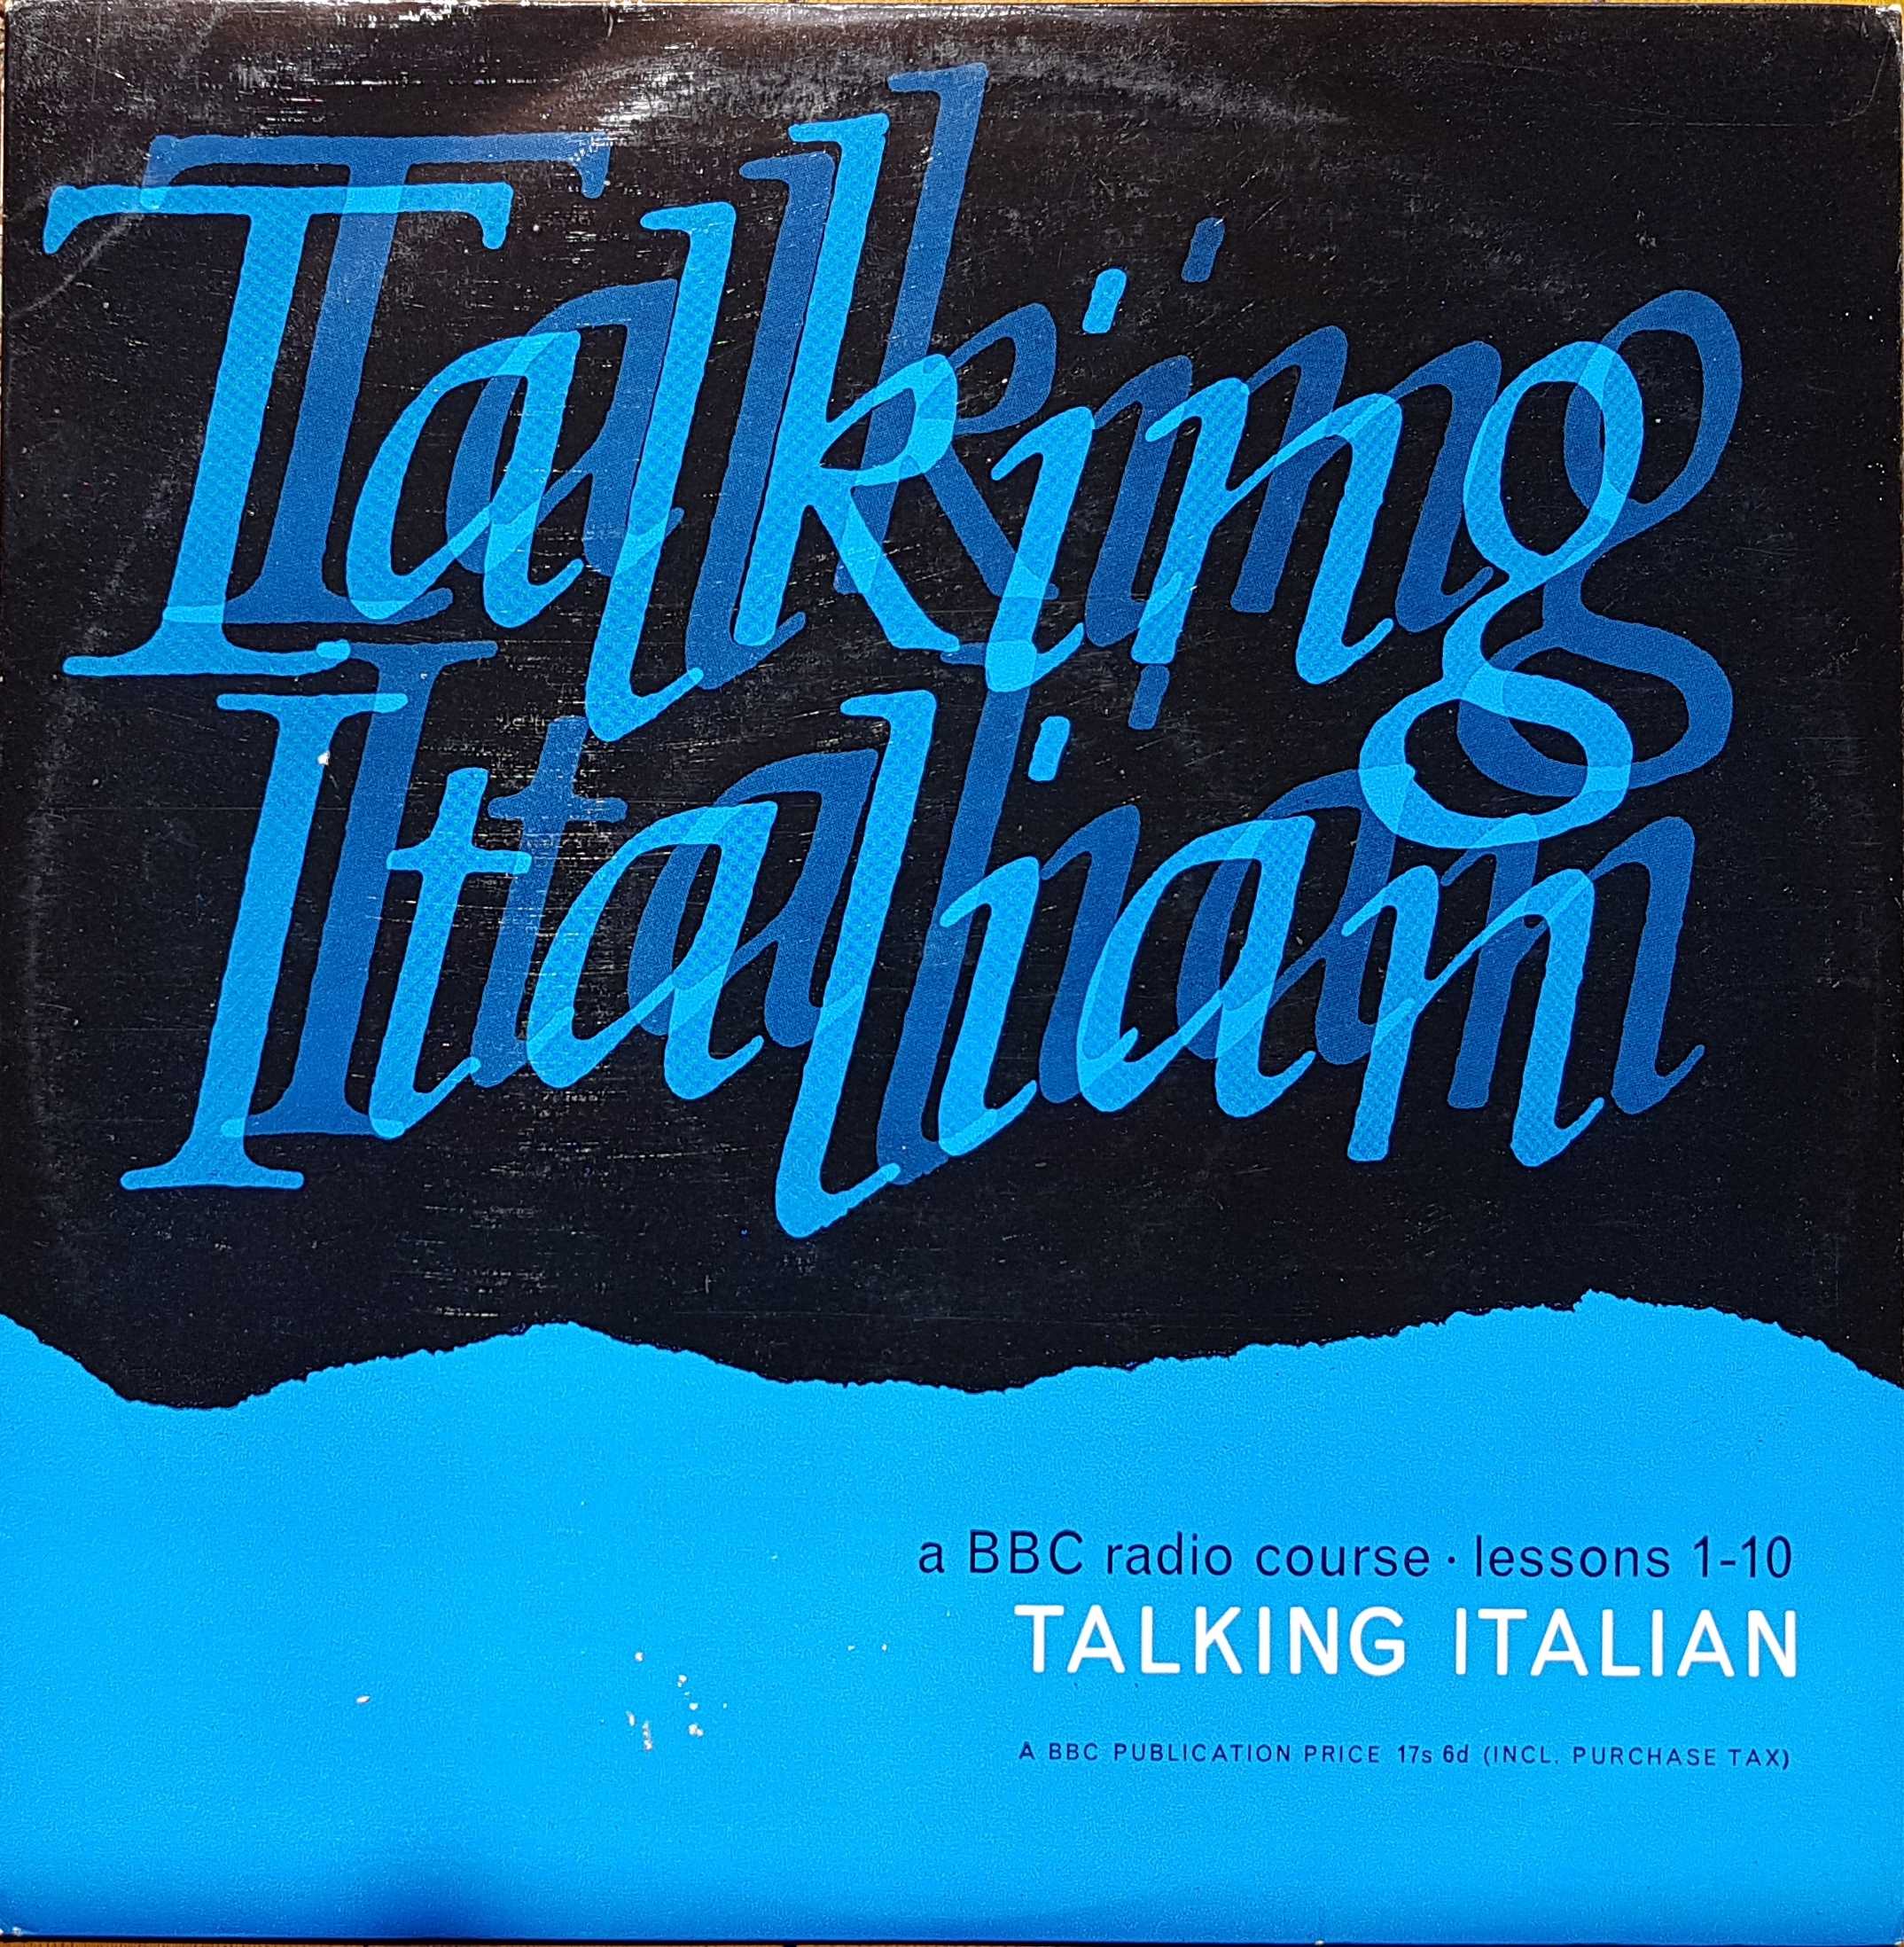 Picture of OP 31/32 Talking Italian - Lessons 1 - 10 by artist Pietro Giorgetti from the BBC albums - Records and Tapes library